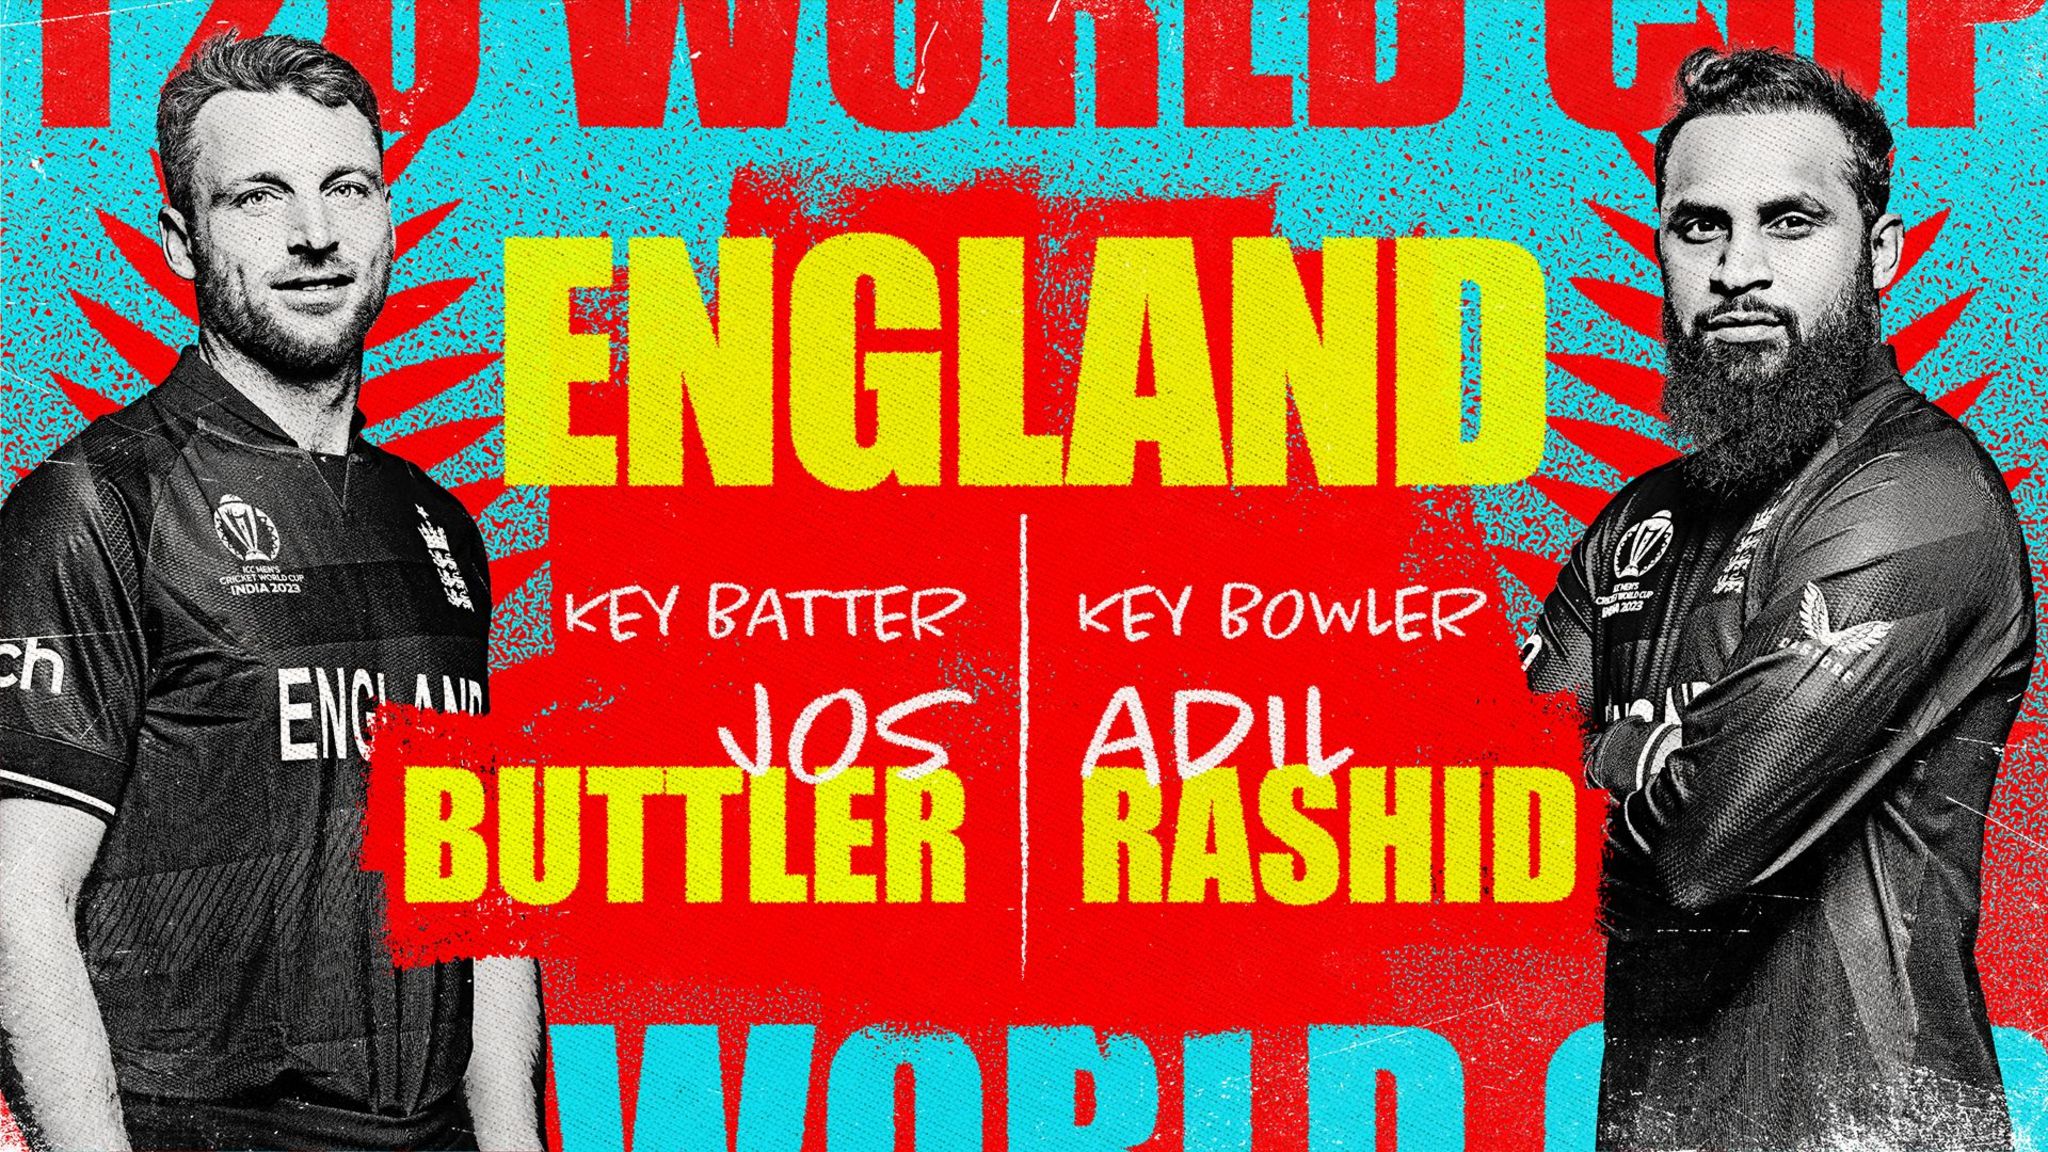 A graphic showing Jos Buttler and Adil Rashid as England's key batter and bowler at the Men's T20 World Cup